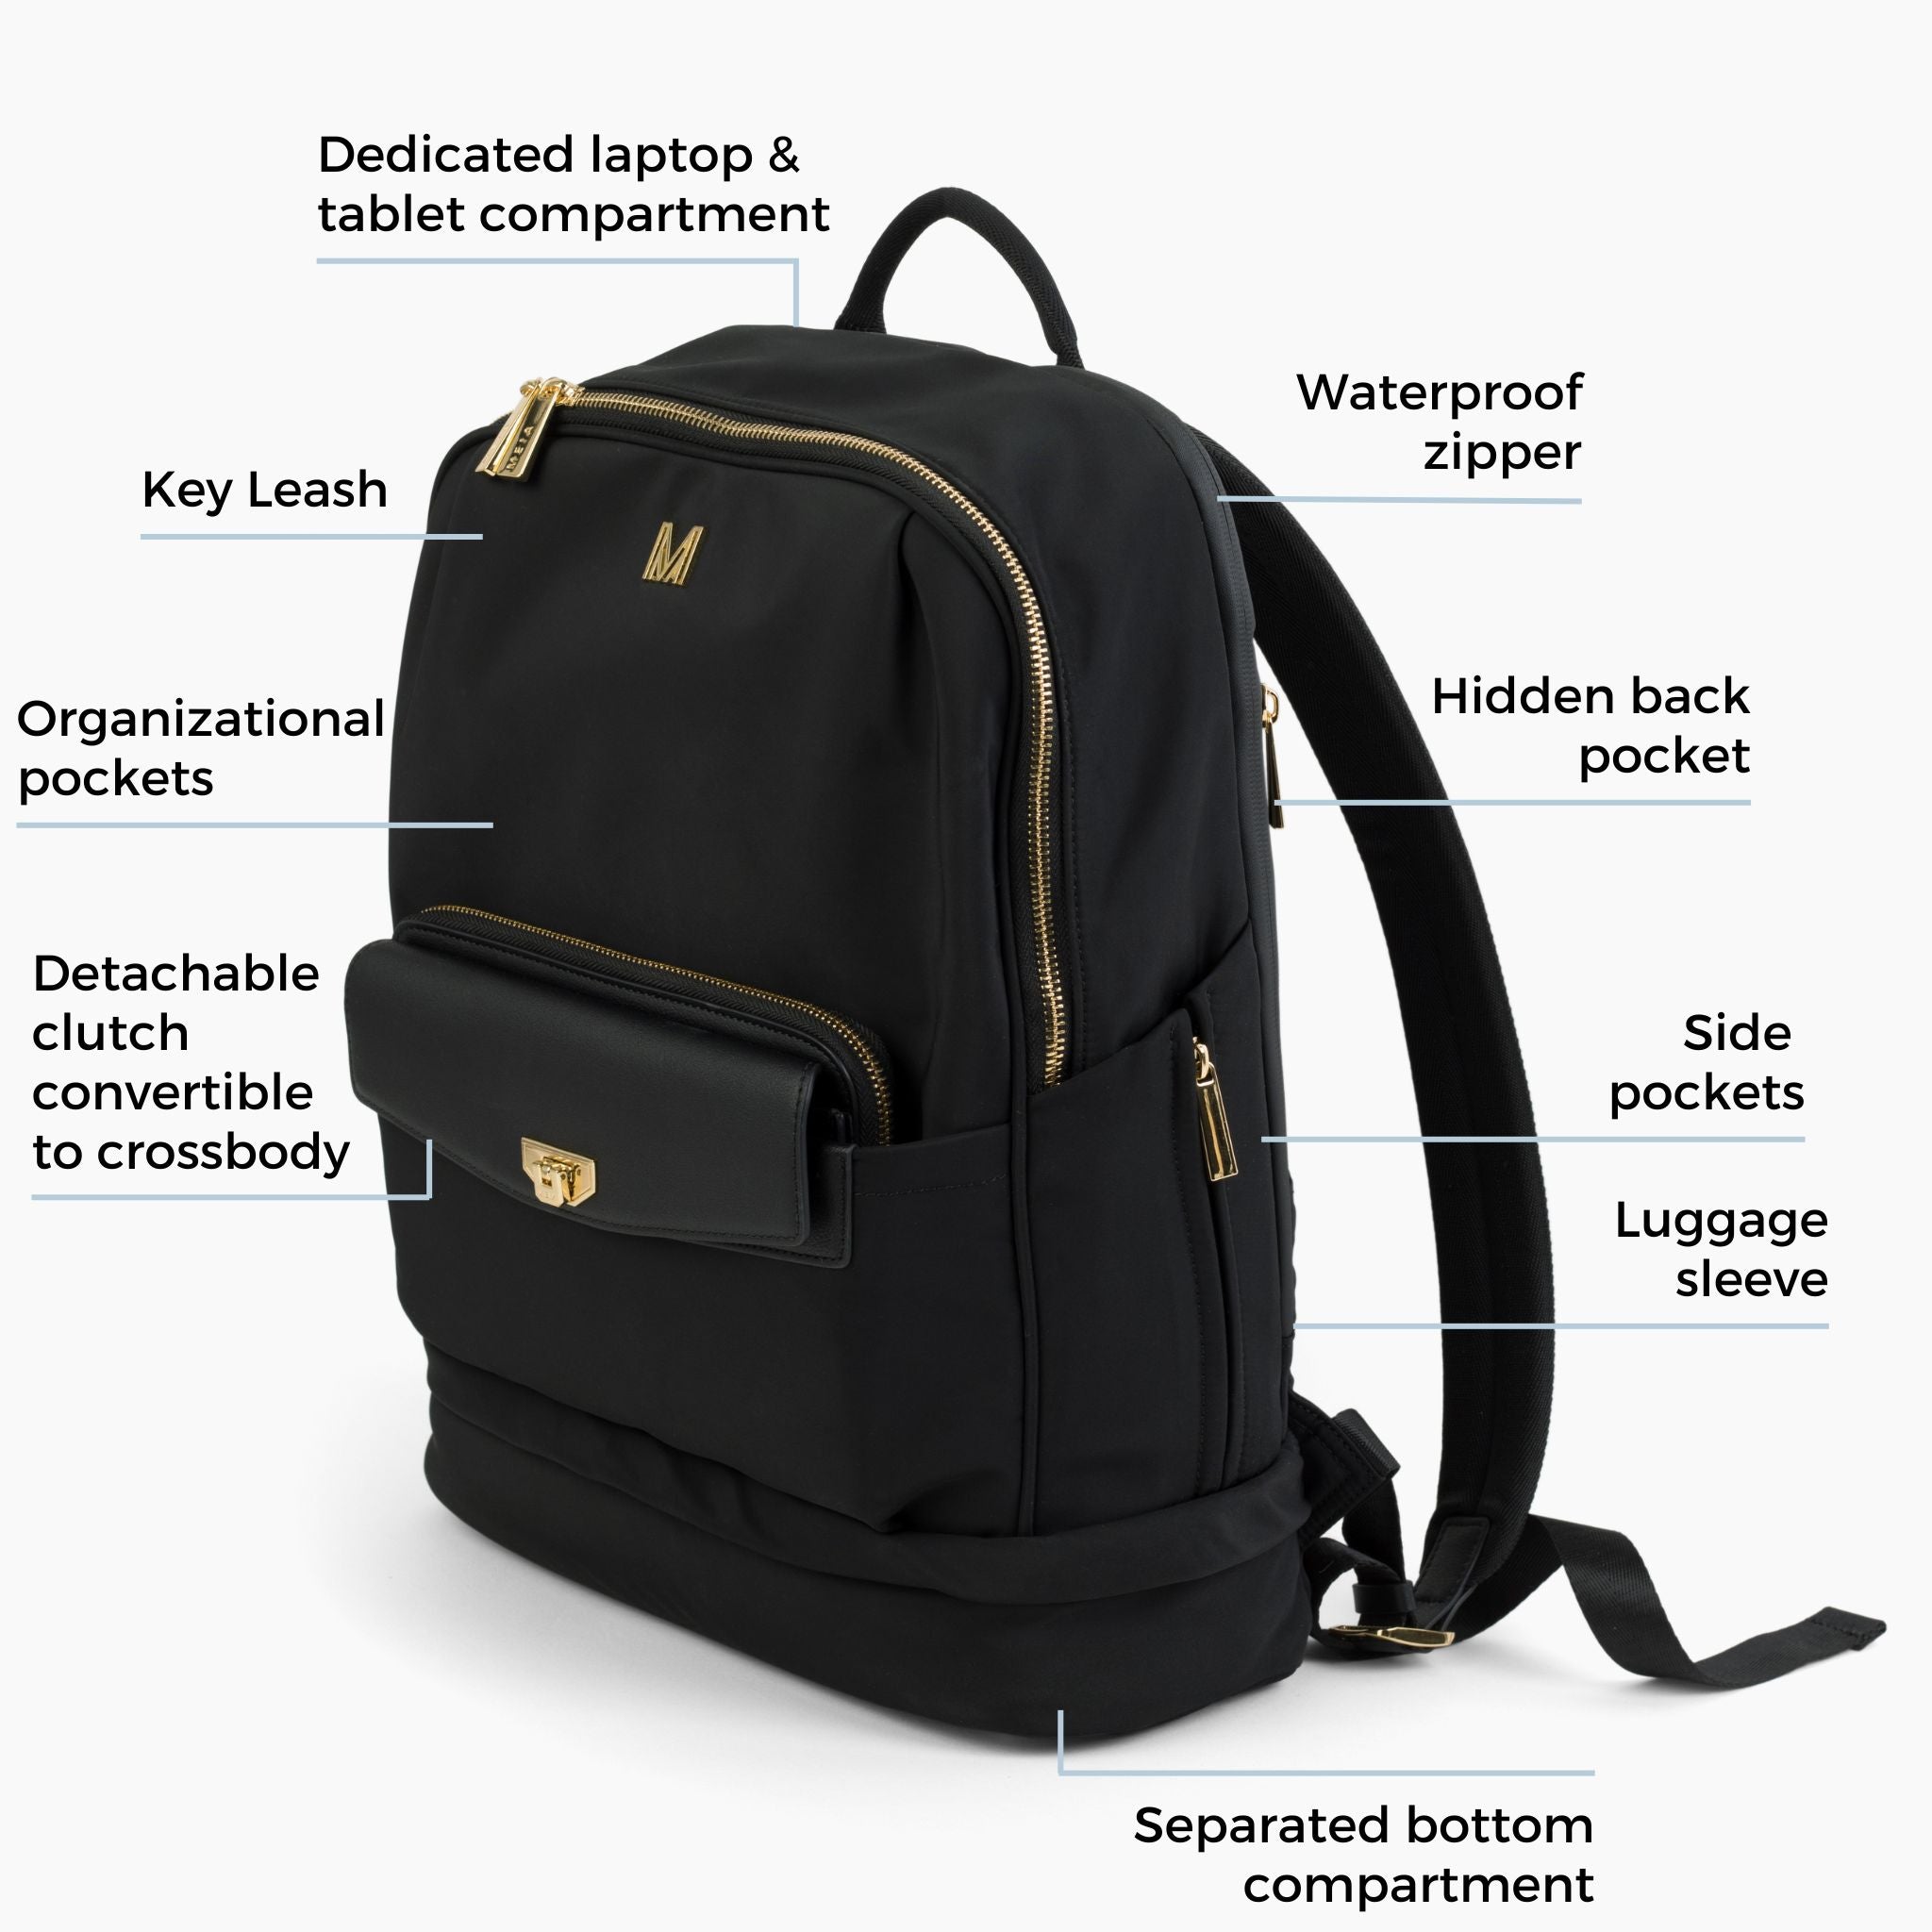 9 Travel Backpack Purses You Need For Your Next Trip | Backpackies